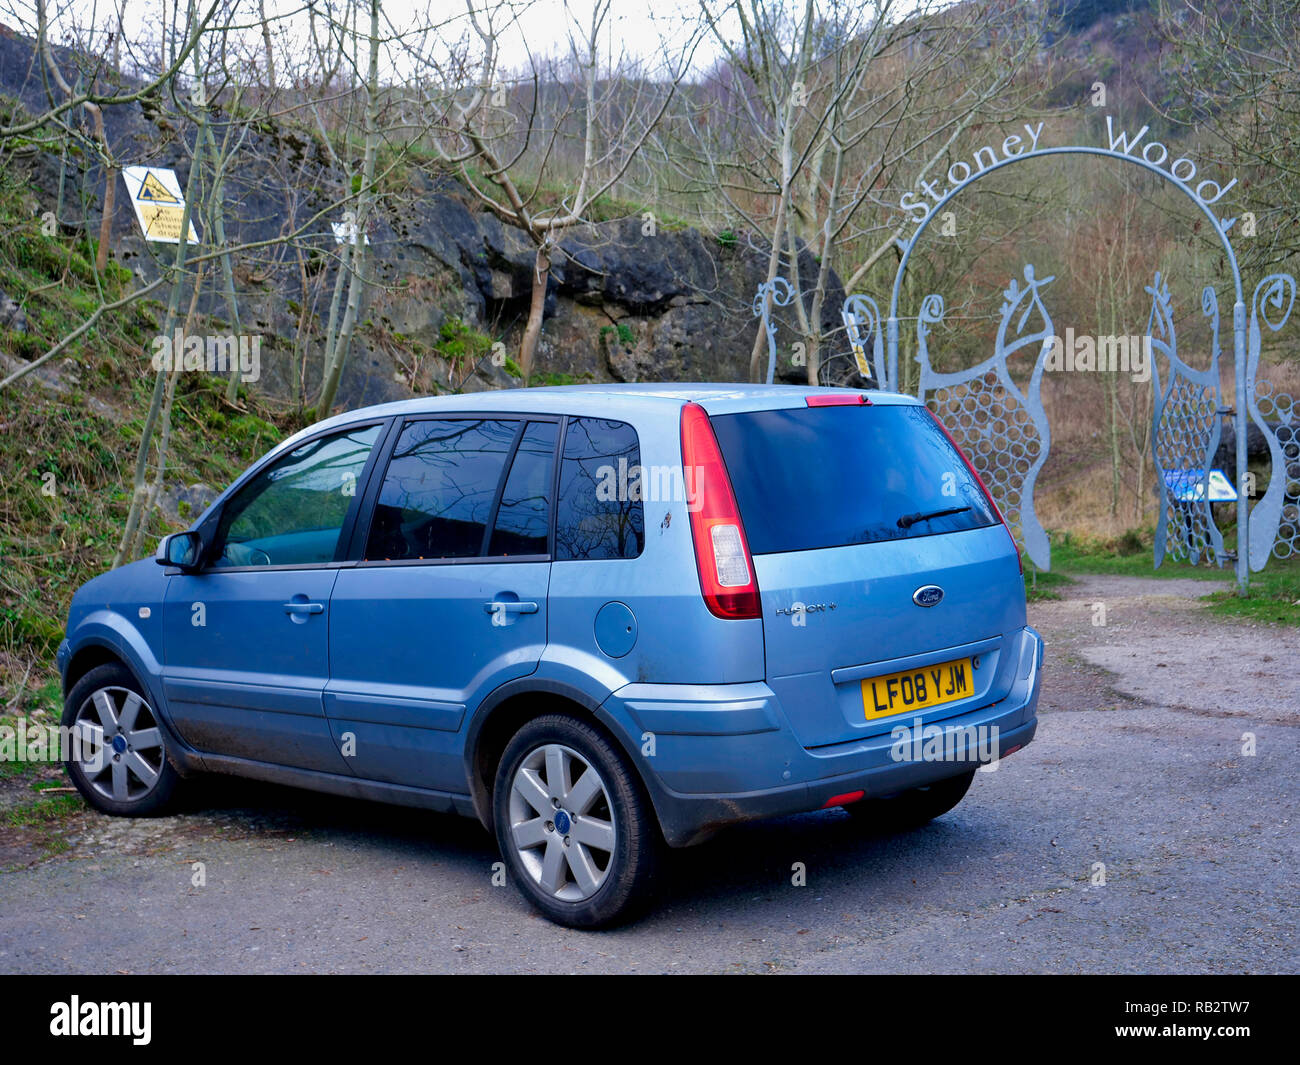 Derbyshire, UK. 06th Jan, 2019. An abandoned light blue Ford Fusion + car parked at Stoney Wood entrance, Wirksworth, Derbyshire, since the New Year has been reported to the Police as possible missing persons or abandoned vehicle, it's near the potentially dangerous old Tarmac Middle Peak Quarry workings Credit: Doug Blane/Alamy Live News Stock Photo